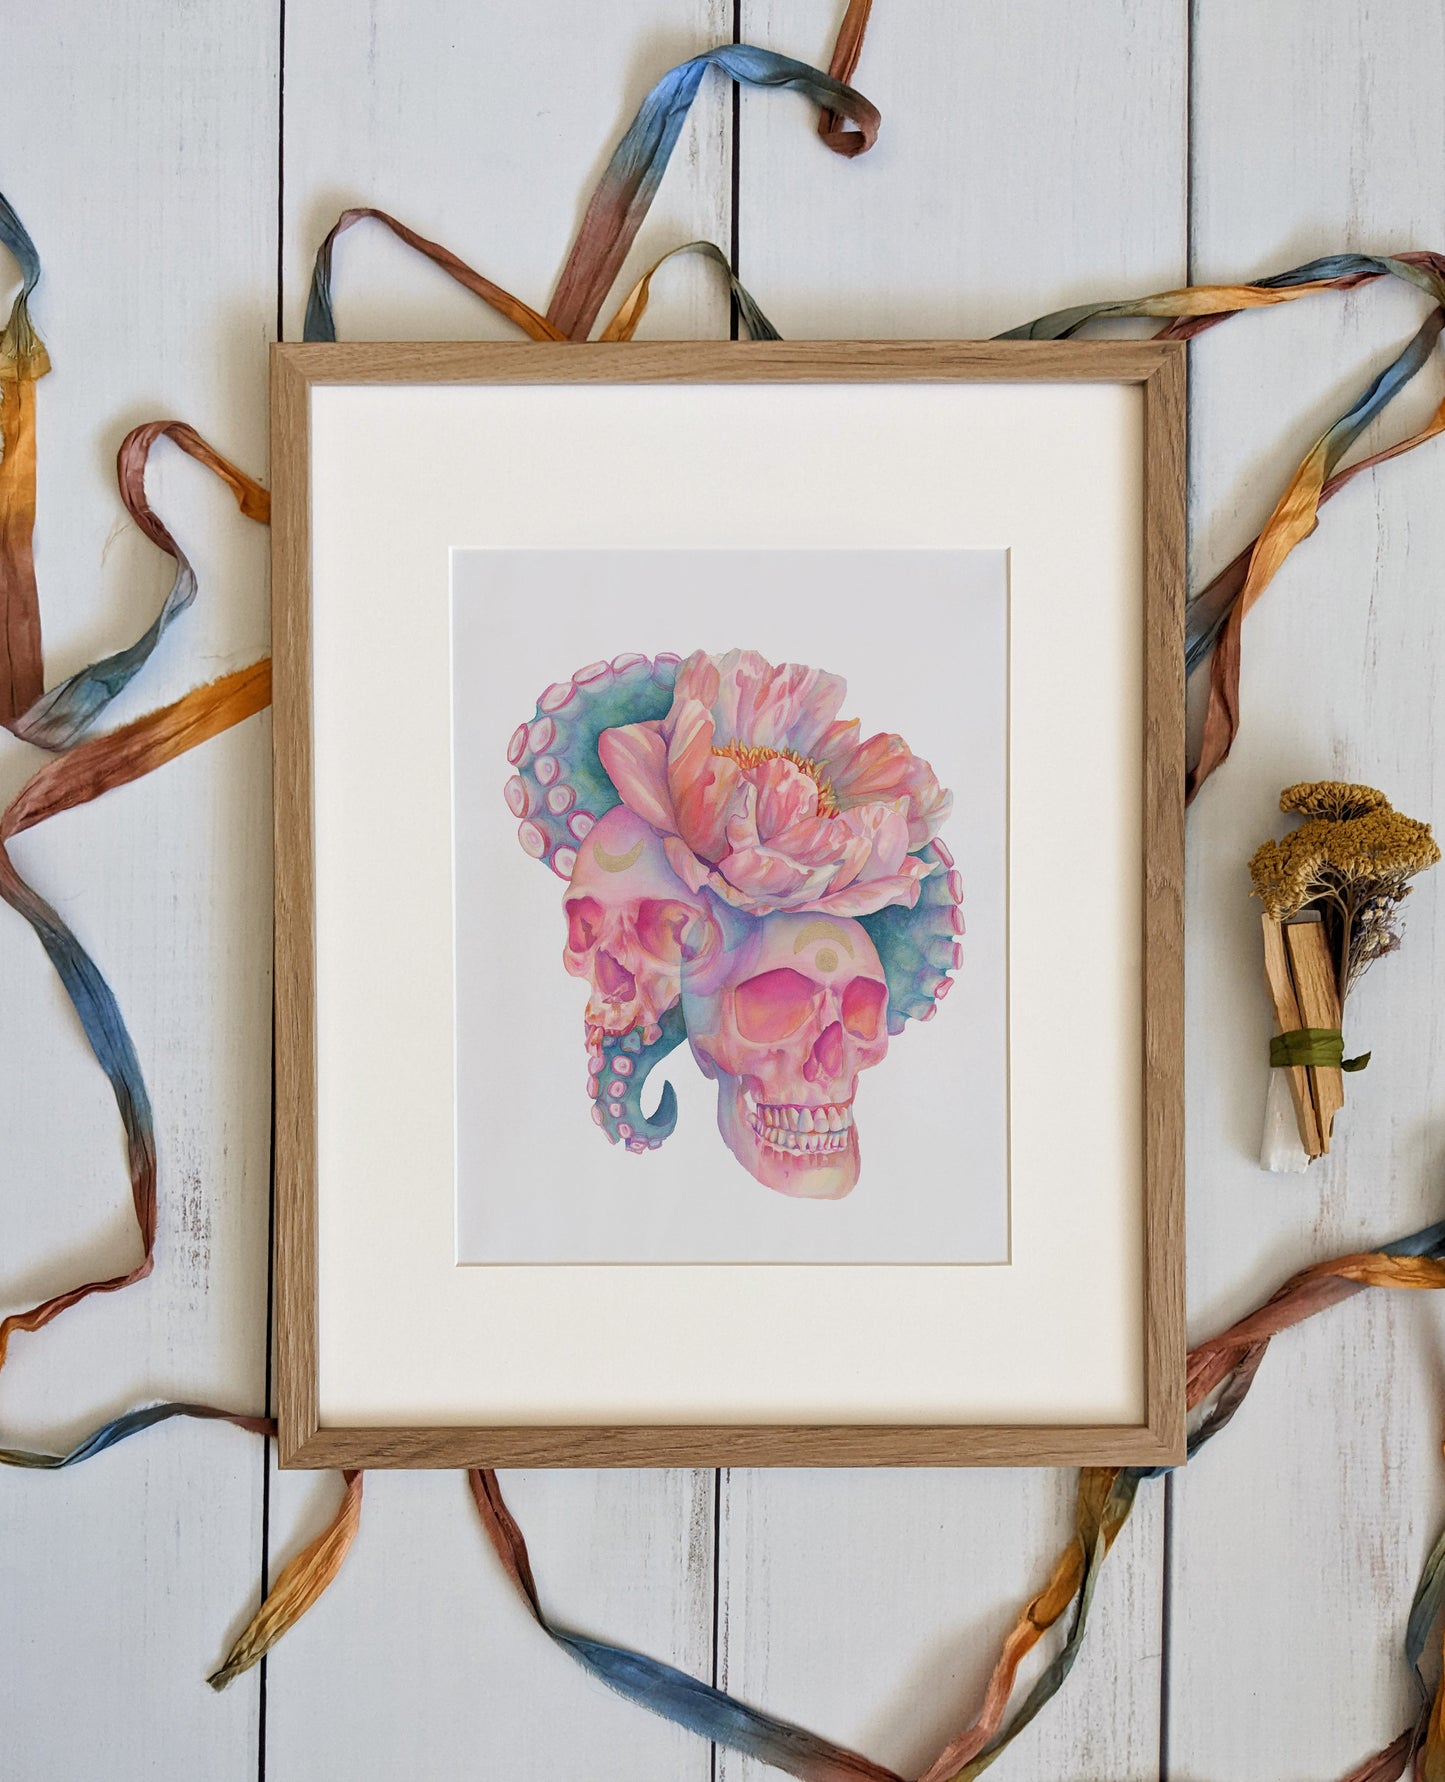 Remind Me of Singing – 11x14 Watercolor Skull Art Open Edition Print